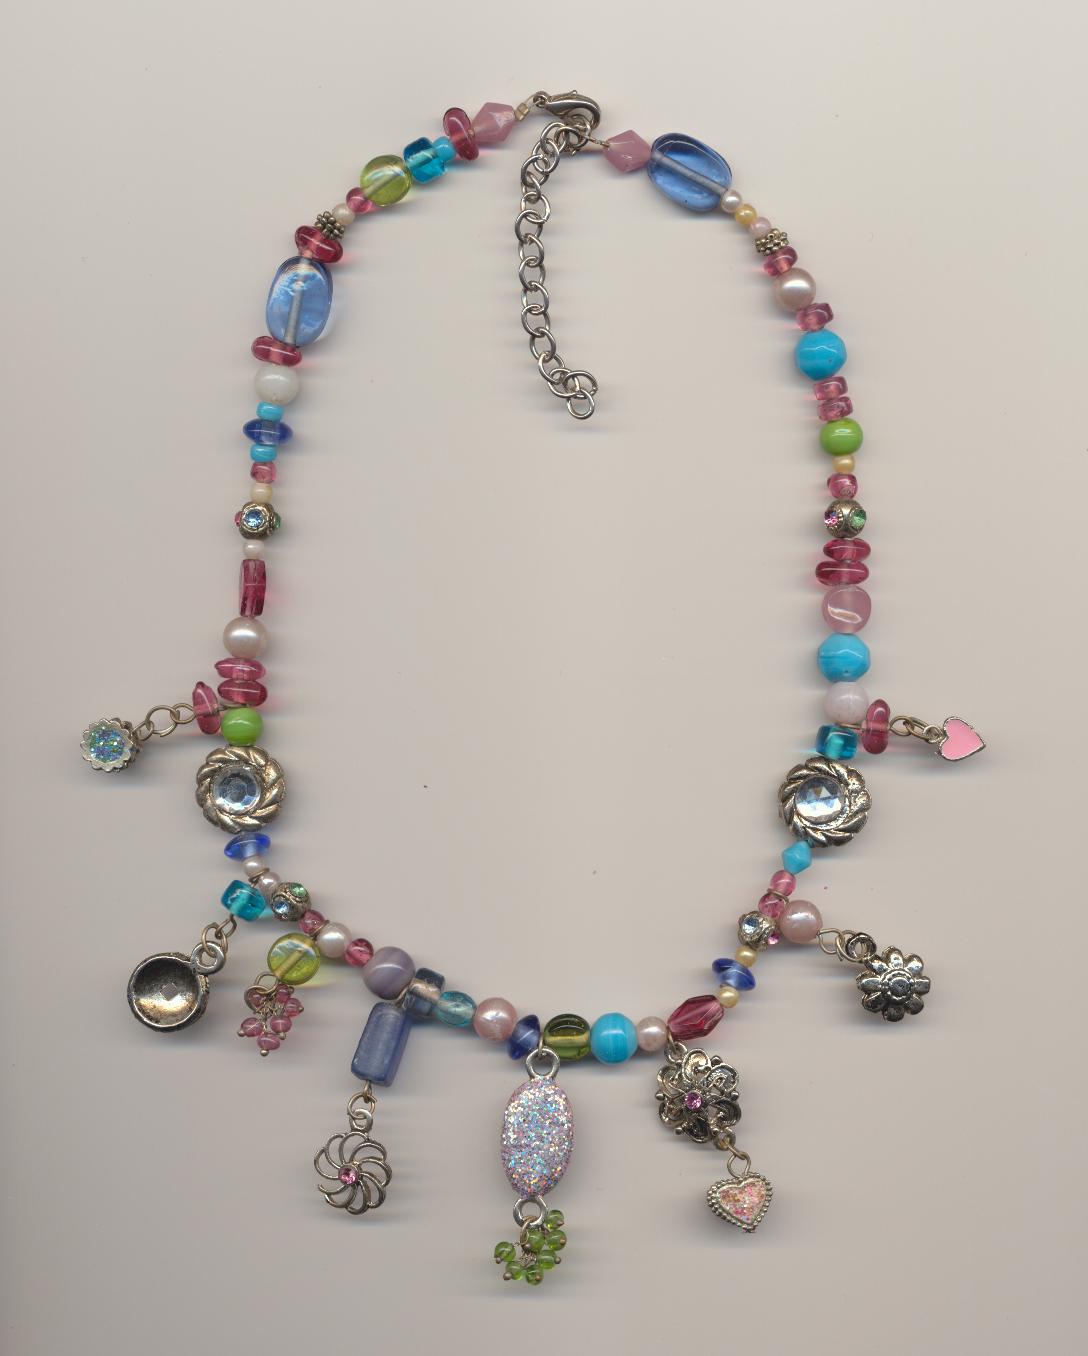 Cheerful modern multicolor bead necklace with extension chain, made of glass beads, various metal elements and glass crystals, ca.2010, length 16.5'' 42cm.